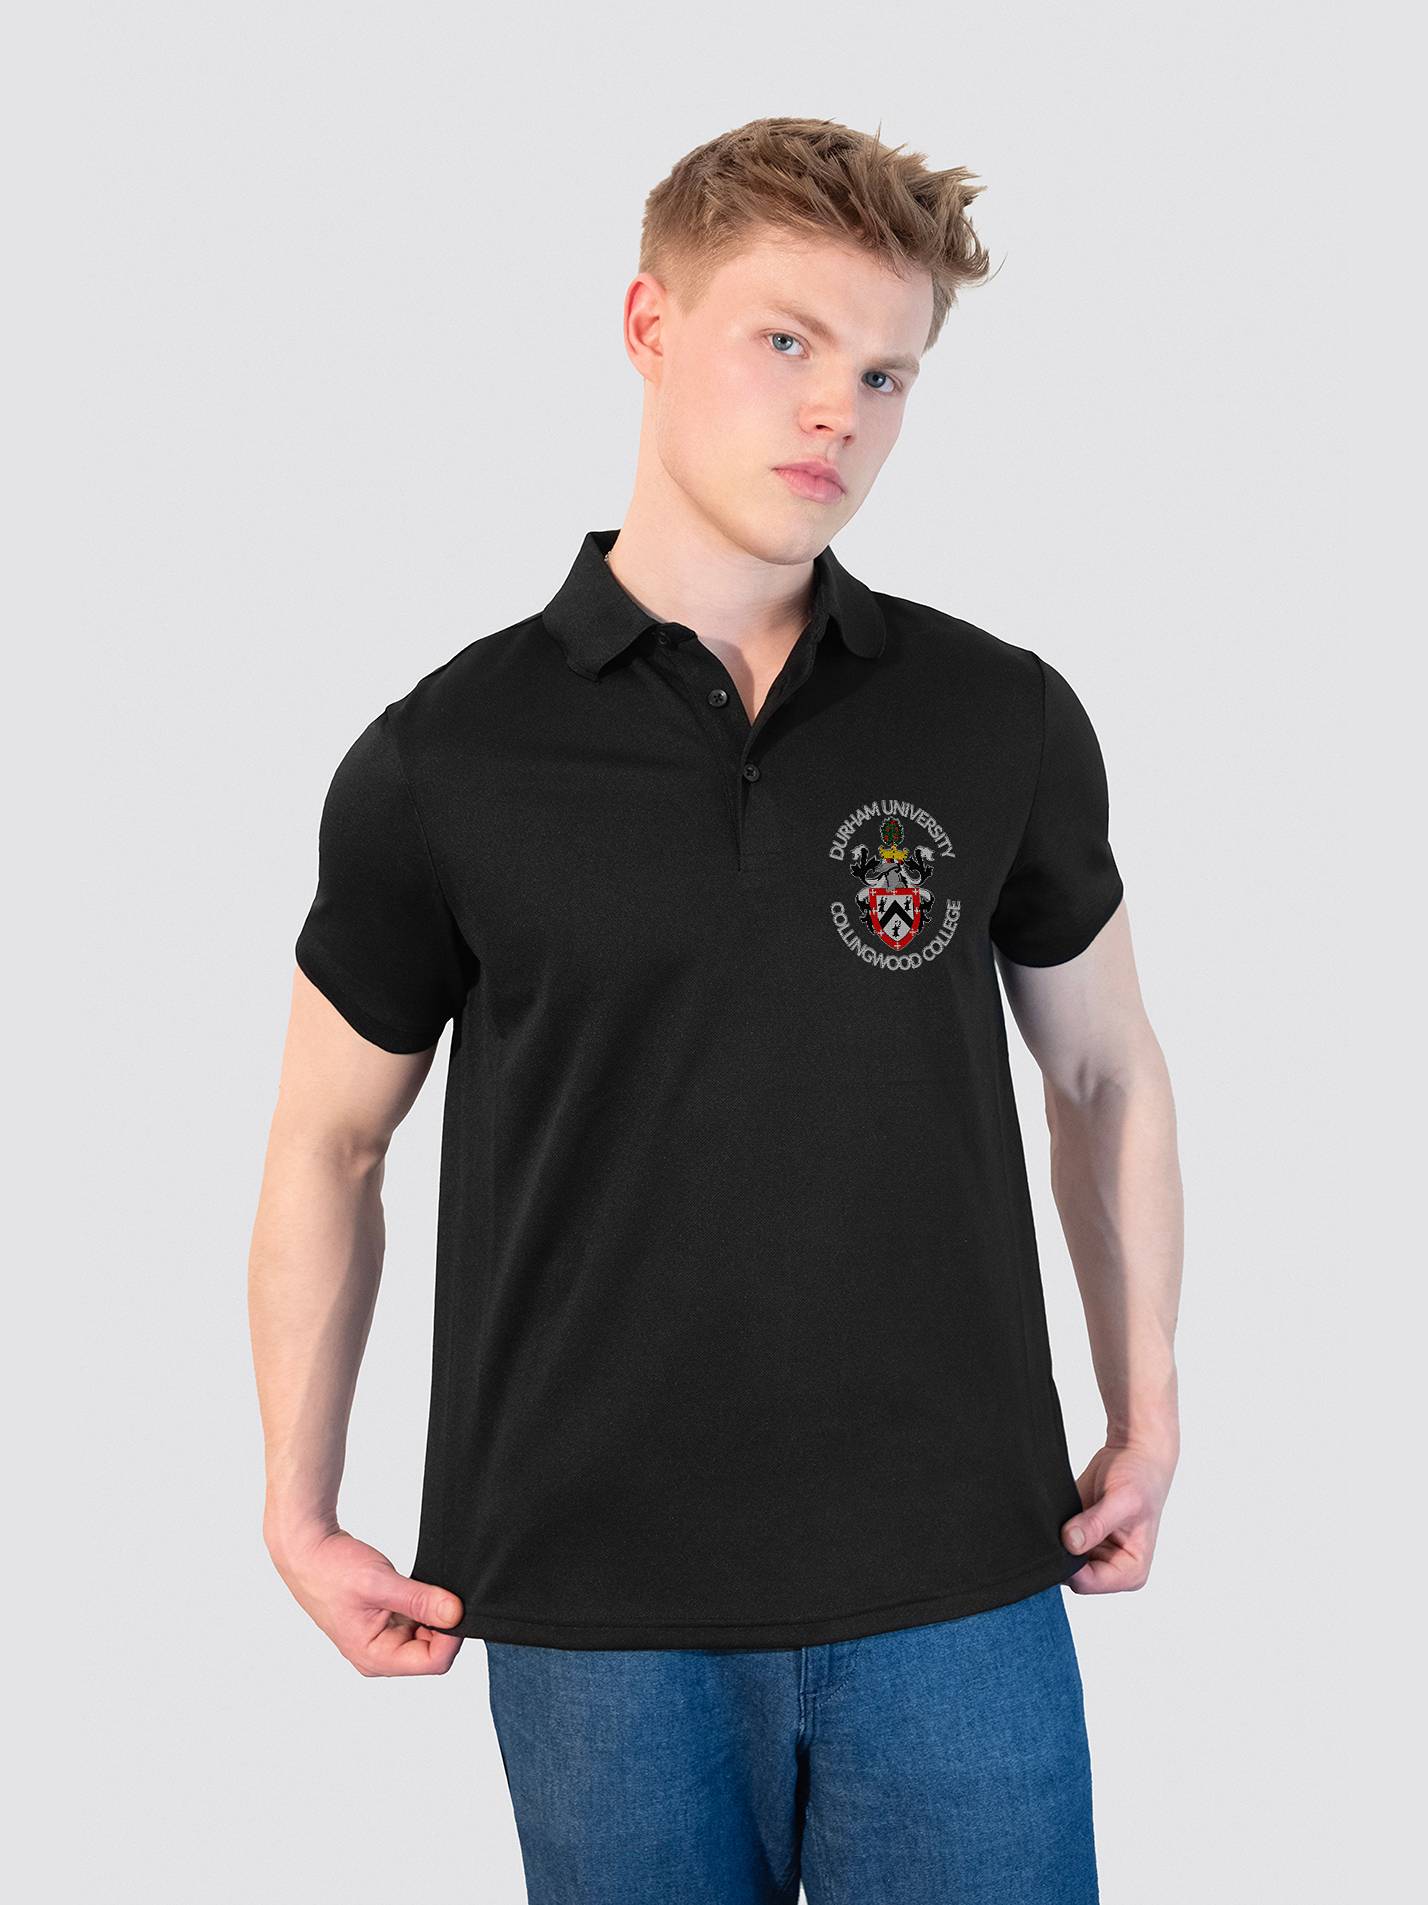 Collingwood College Durham Sustainable Men's Polo Shirt